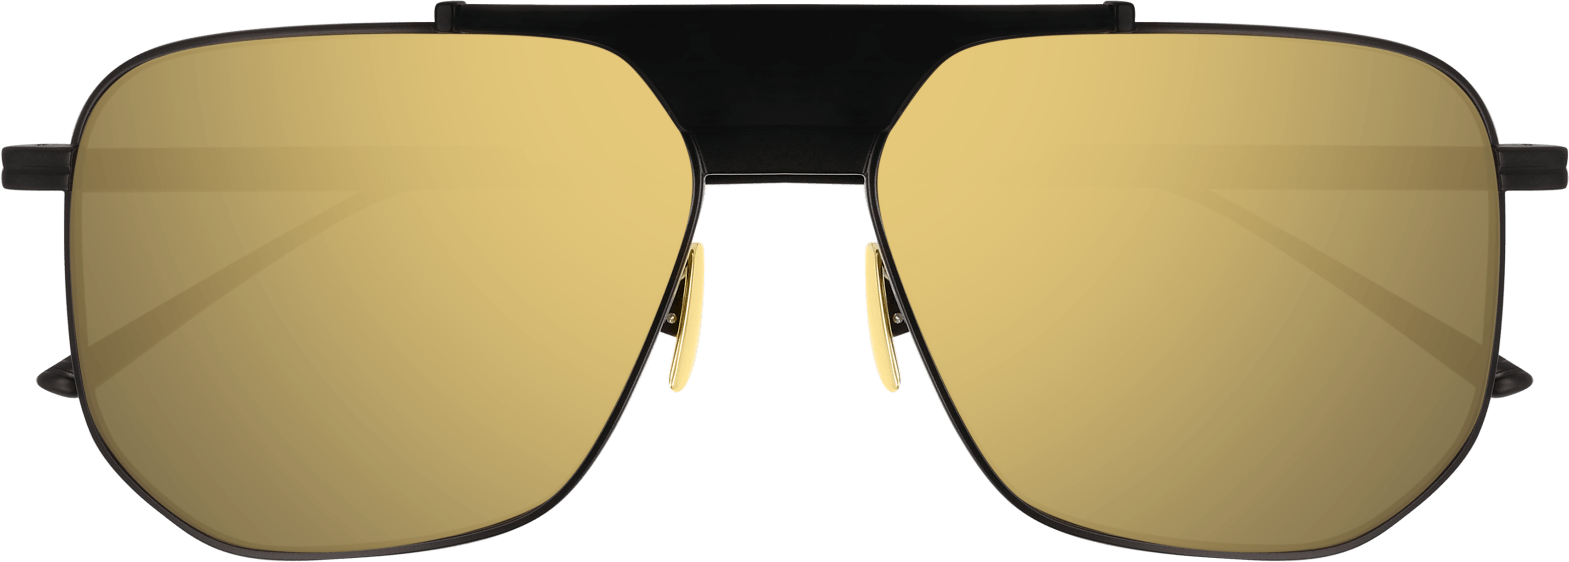 Color_BV1036S-002 - BLACK - GOLD - MIRROR(DOUBLE)